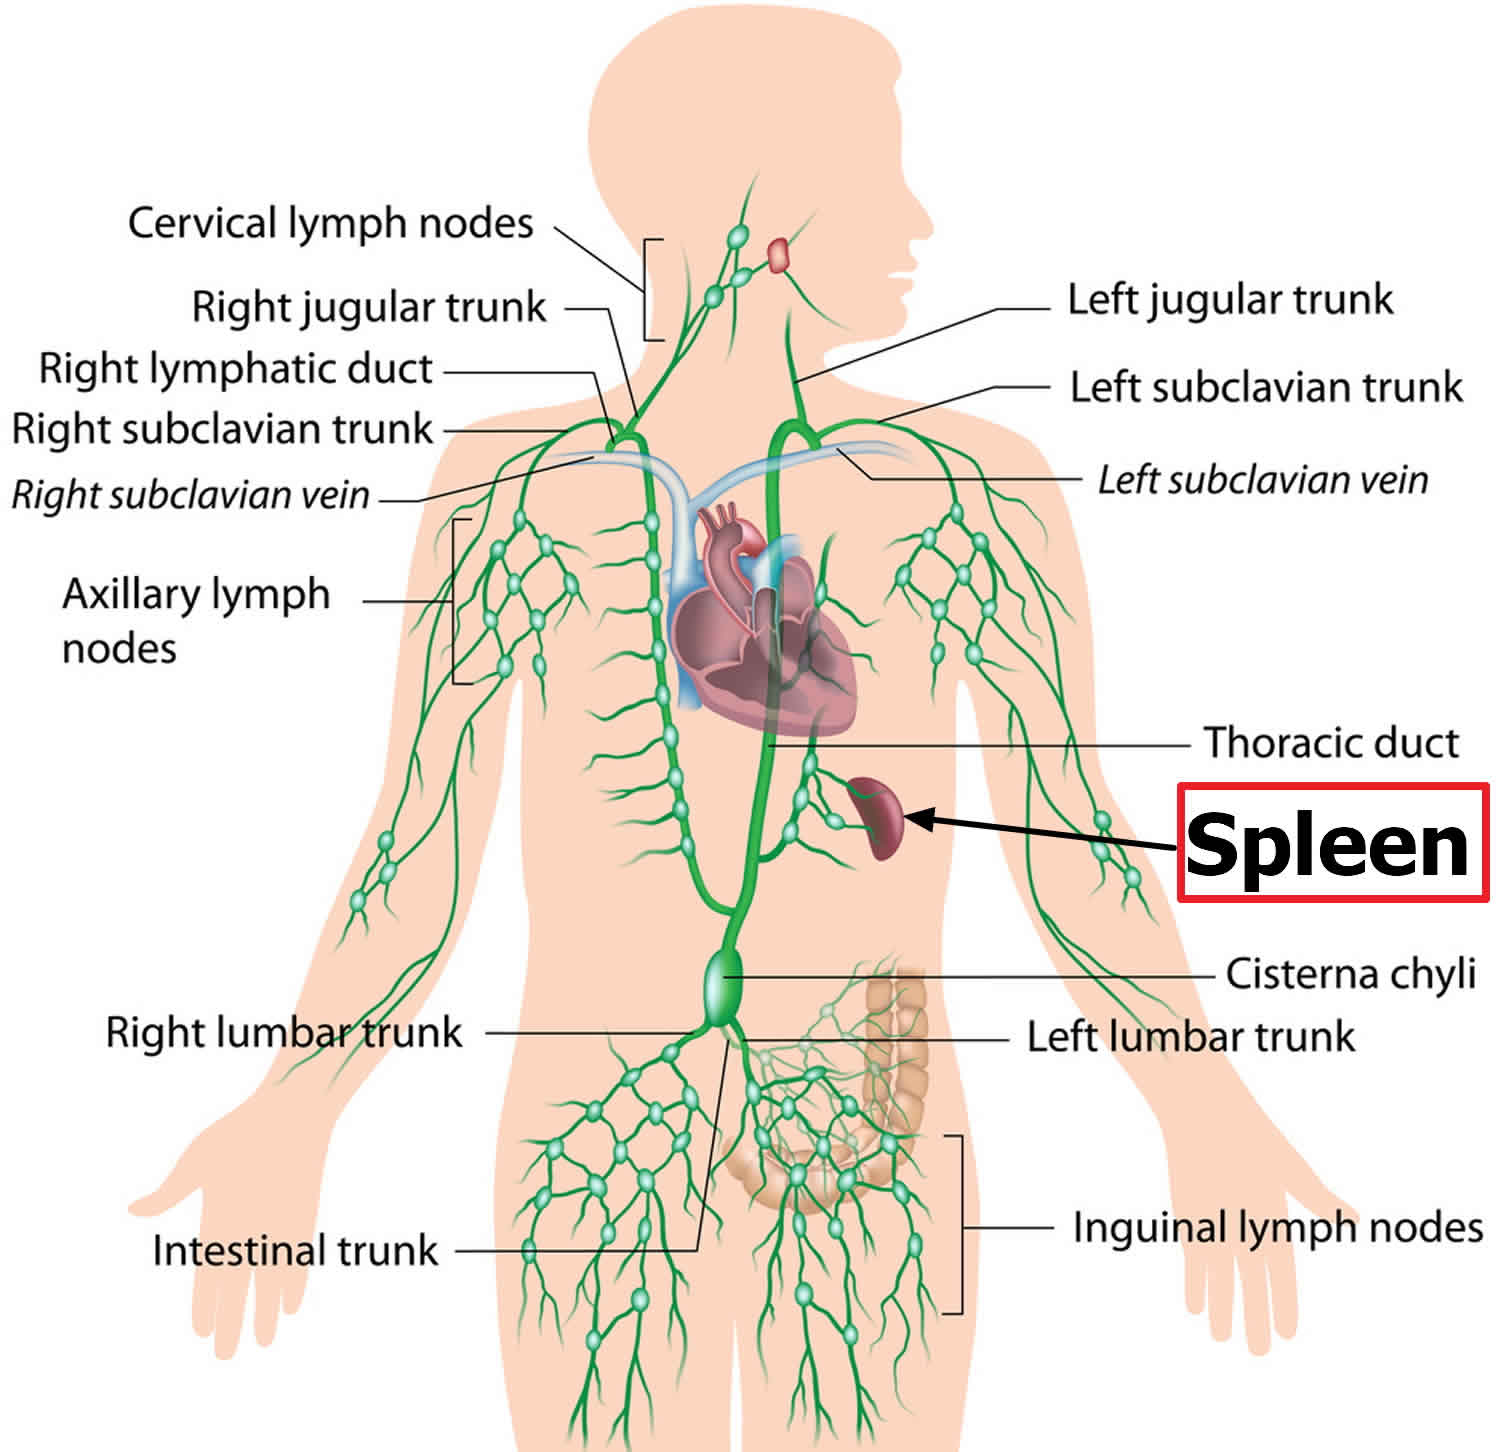 Spleen and the lymphatic system